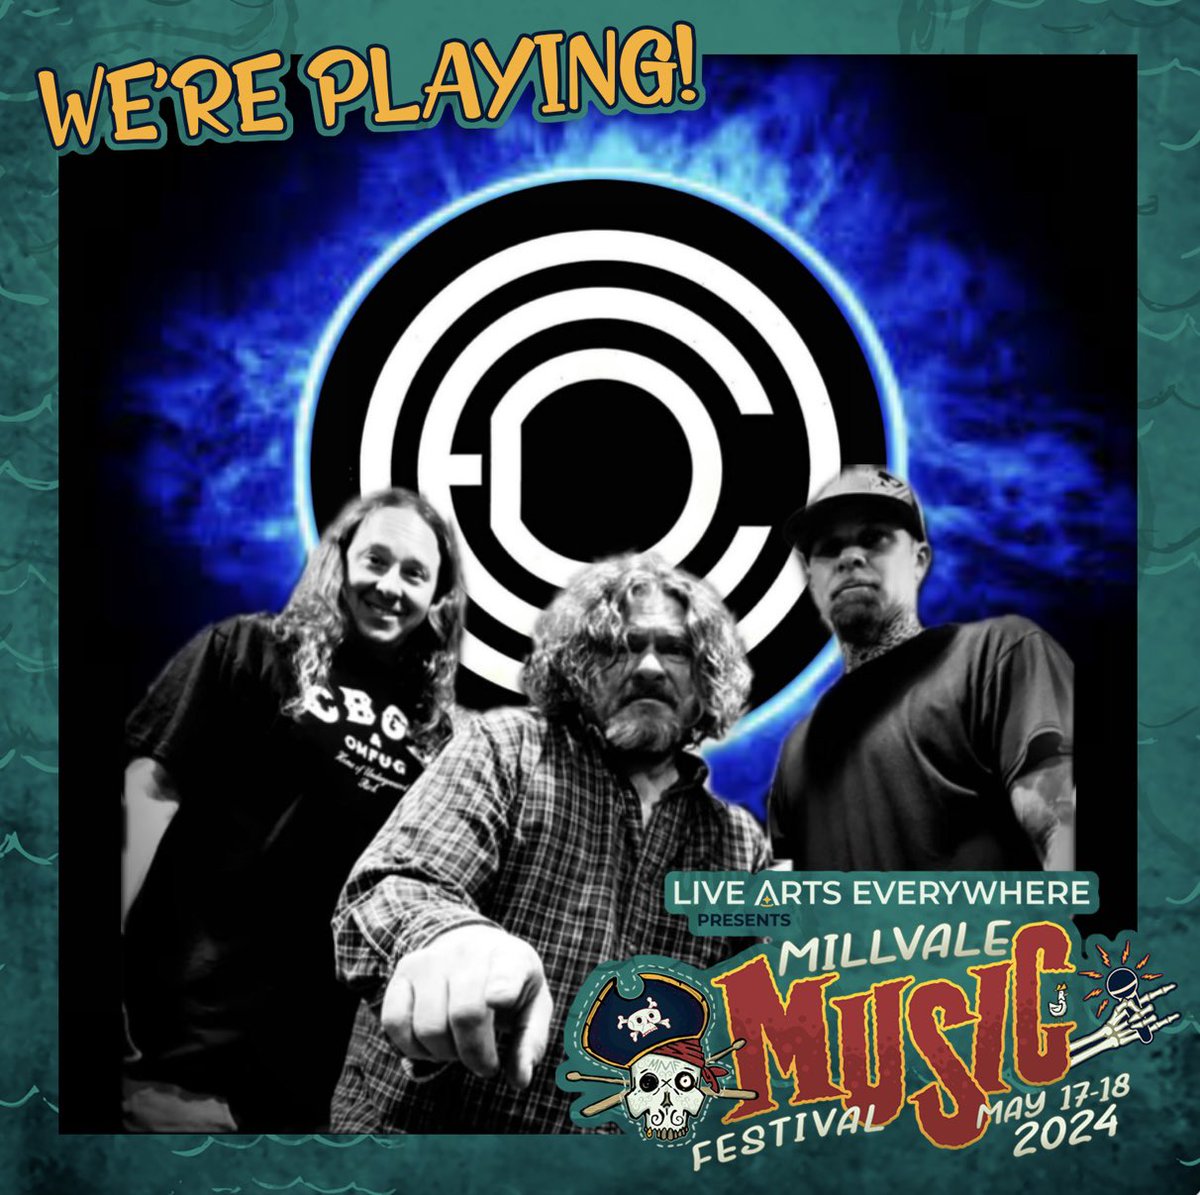 Saturday, May 18th, 1p. OED plays at 3p!Free music! Double L Bar is the place to be! 11 bangin’ bands! Check it out! Millvale Music Festival #mmf2024 #bands #alternativerock #music #pittsburghmusicscene #thingstodoinpittsburgh #Rockandroll #party #friends #supportlocalmusic